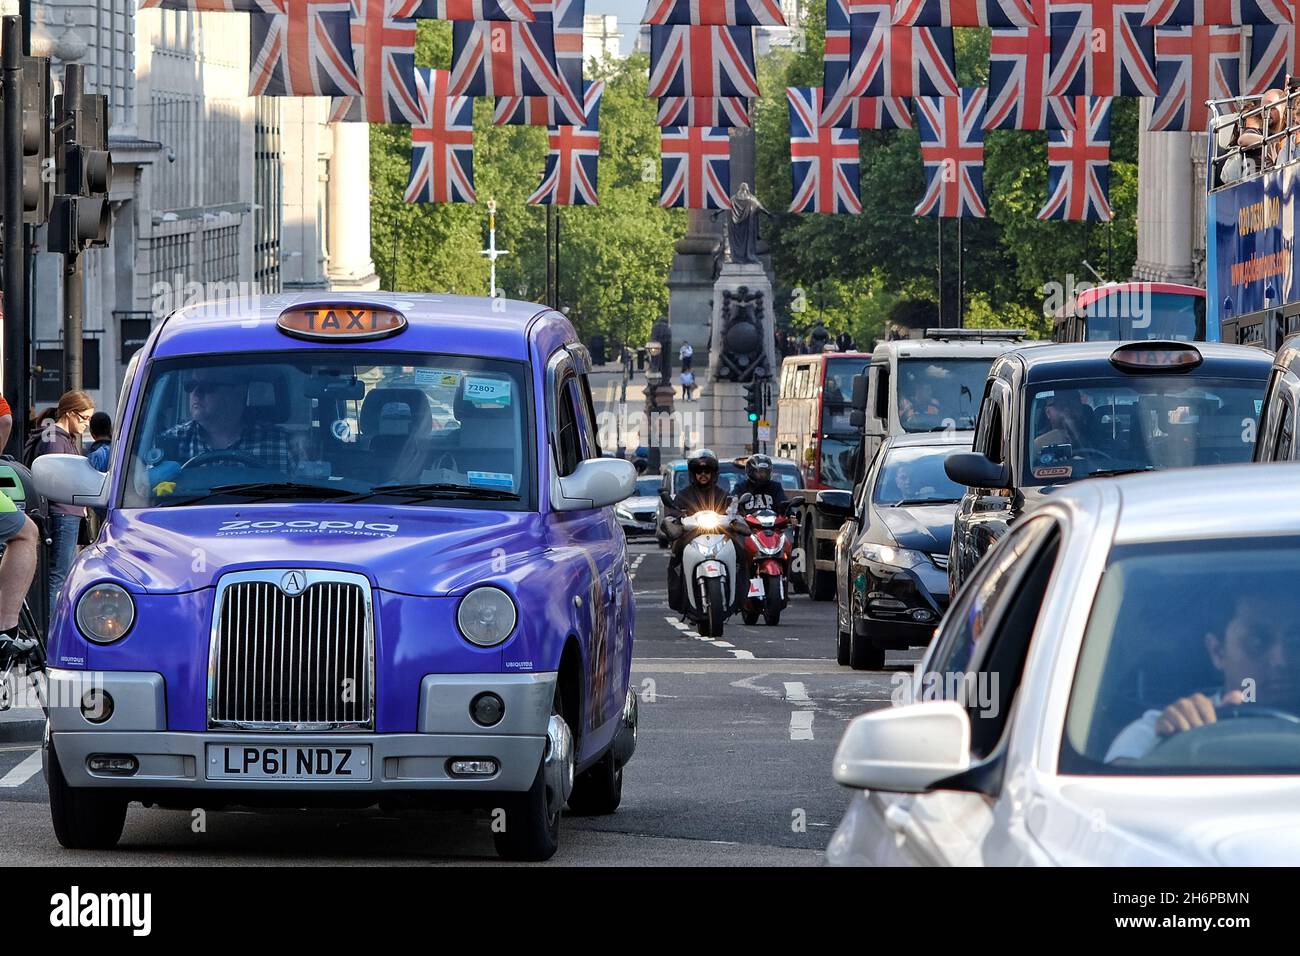 London, United Kingdom - May 21, 2018 : Traffic jam in downtown London Stock Photo